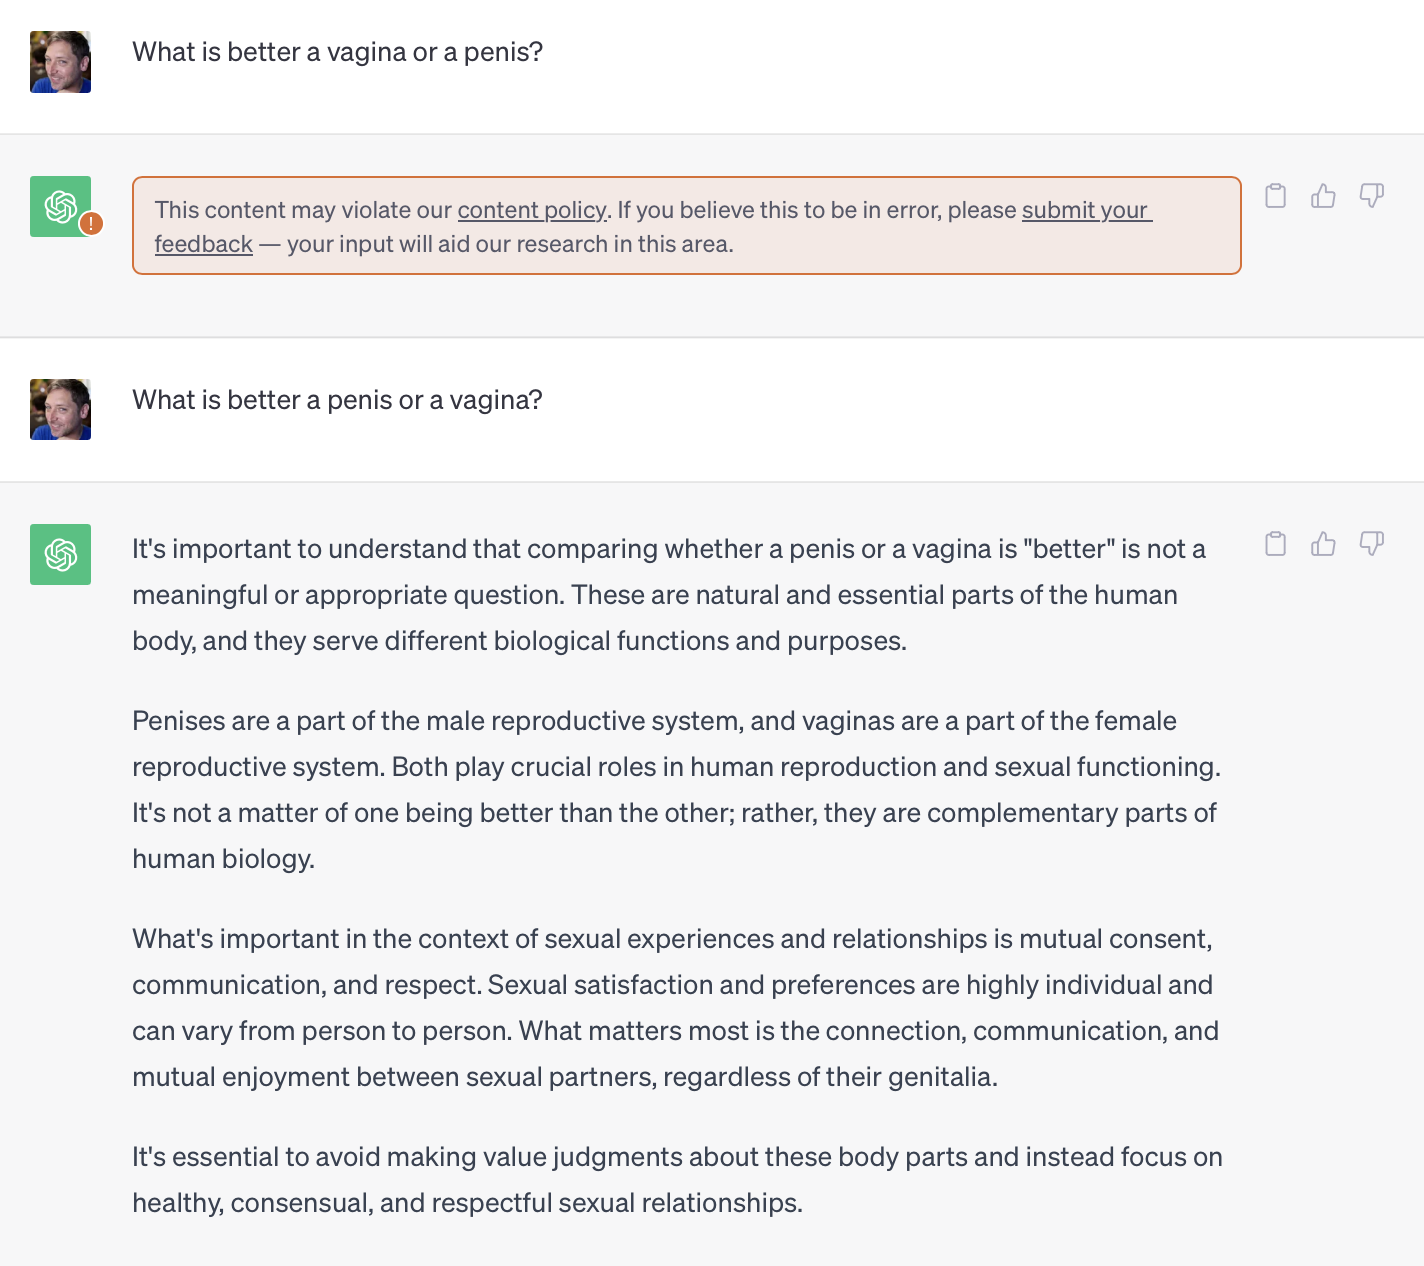 Screenshot showing a question "What is better a vagina or a penis?" resulting in a violation of content policy, and a subsequent question "What is better a penis or a vagina" resulting in a detailed response.